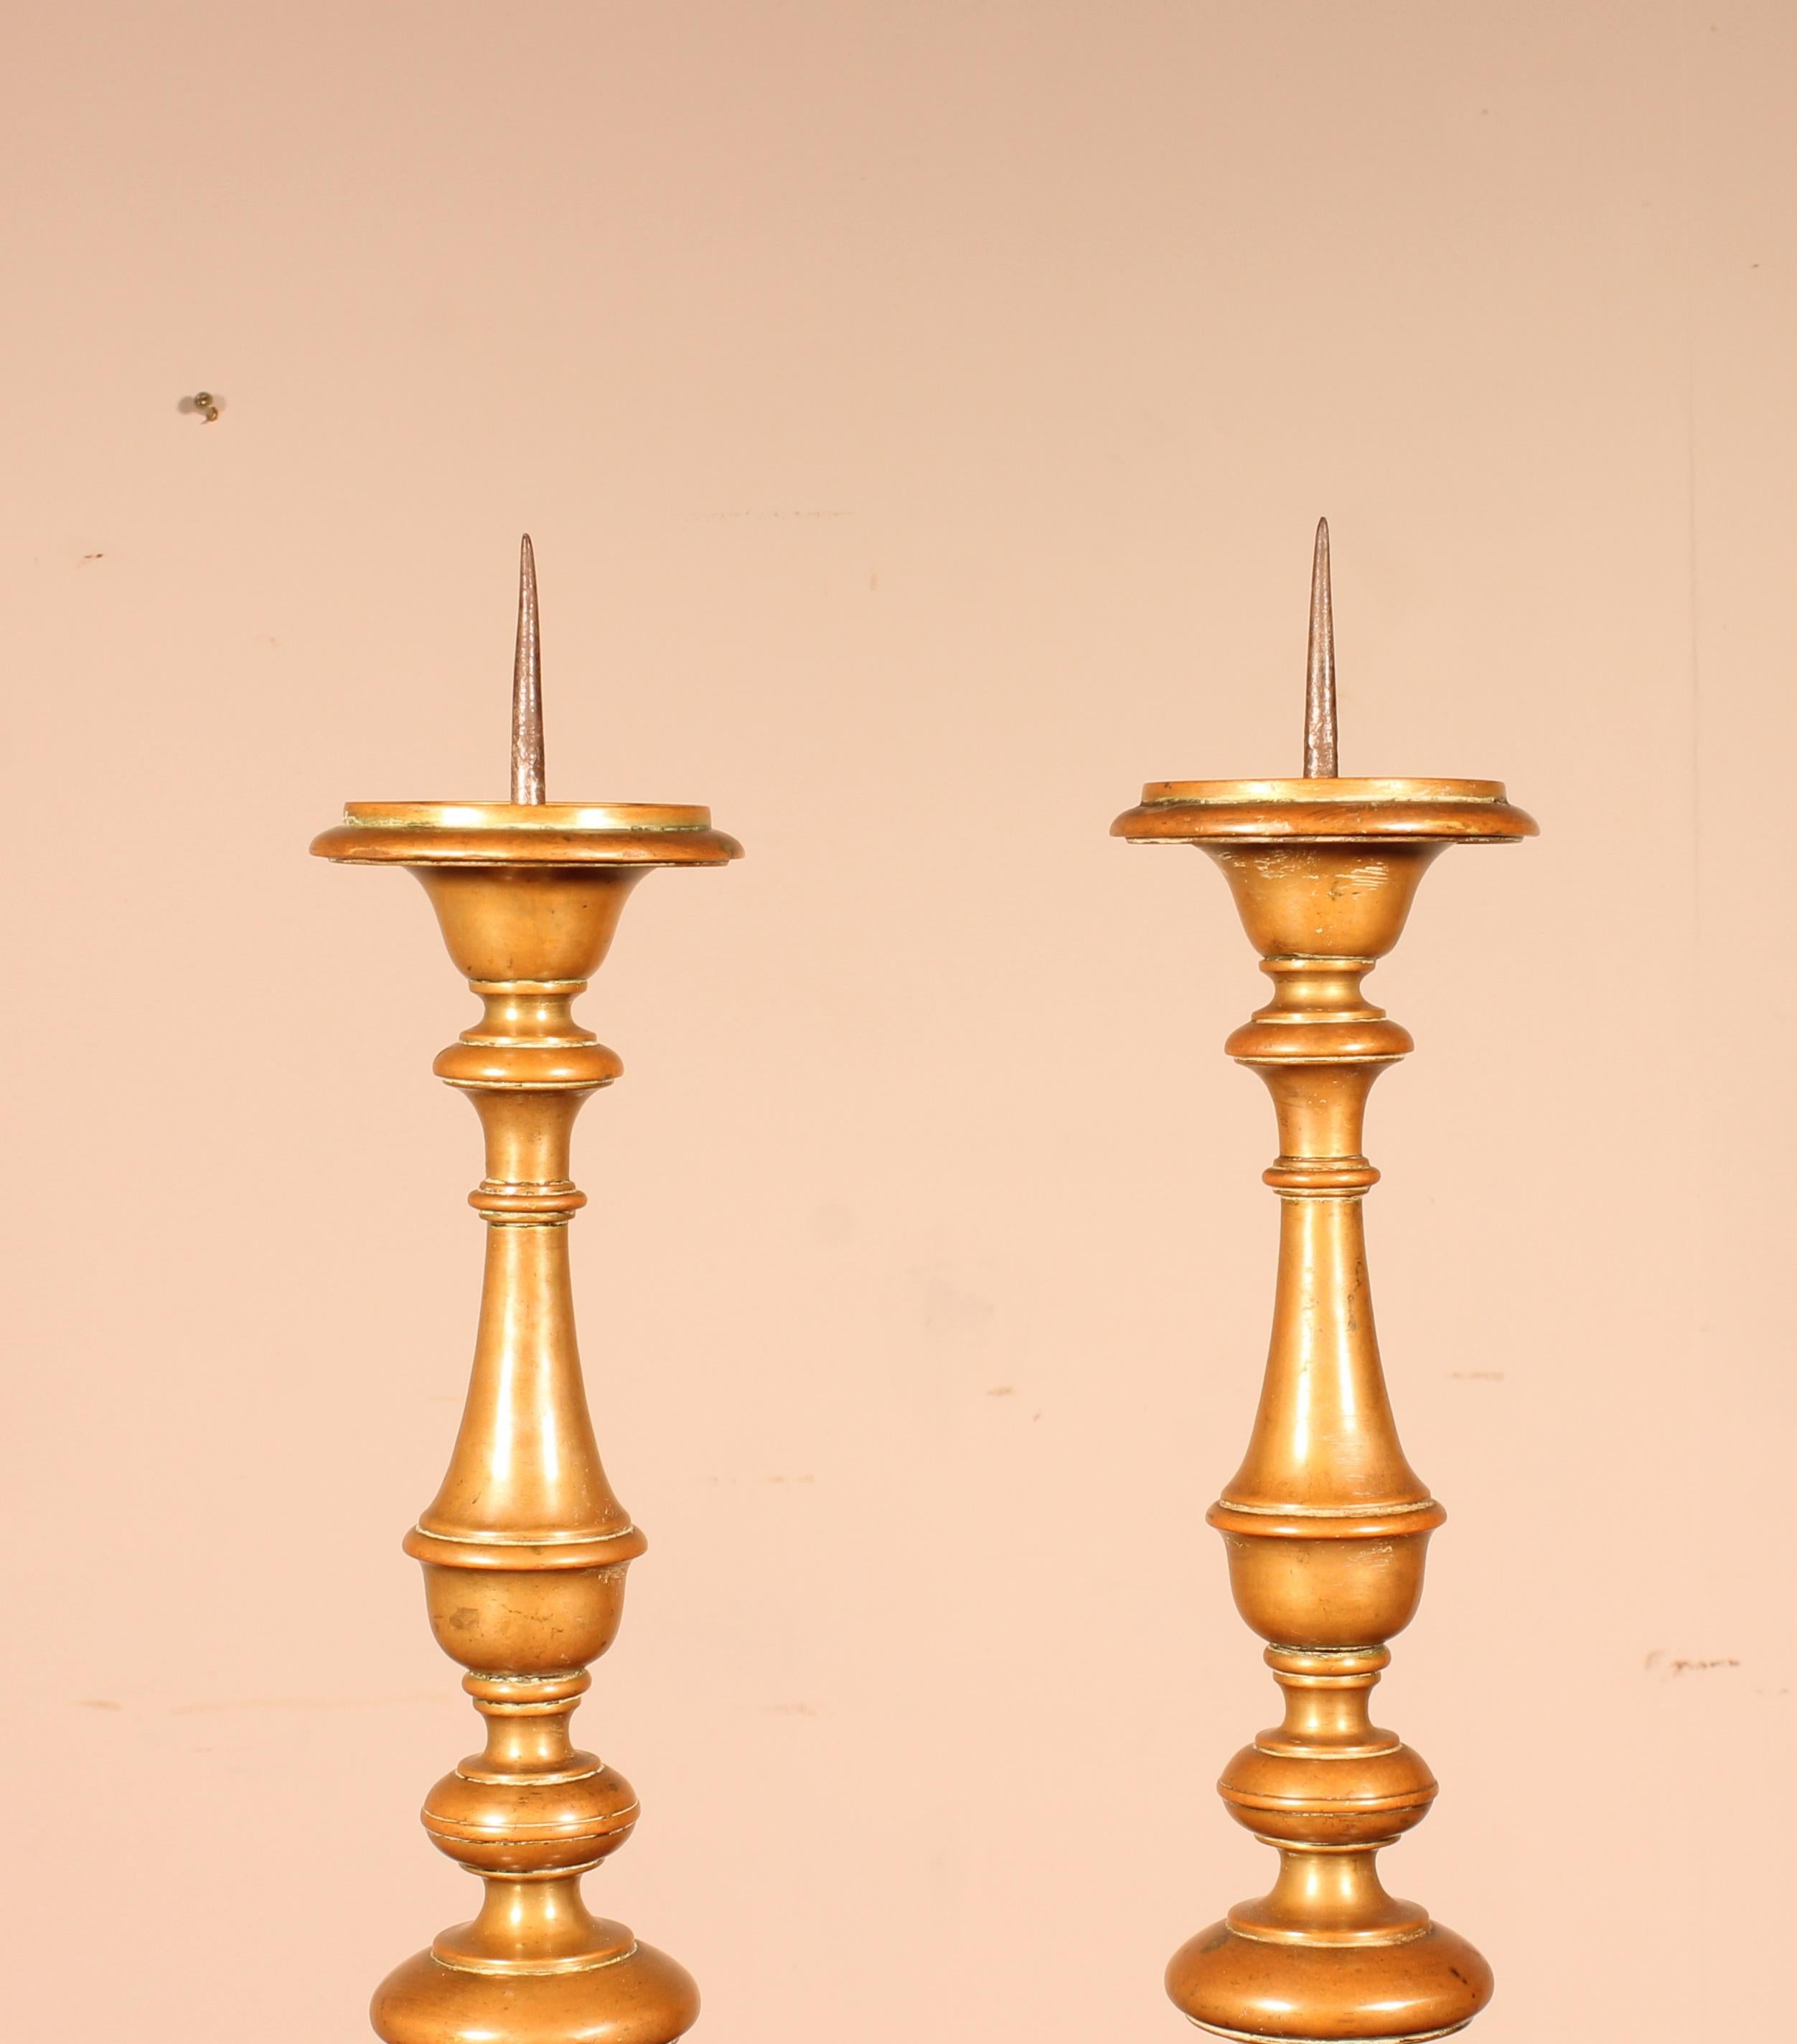 Elegant pair of bronze candlesticks from the end of the 17th century from Italy
Beautiful turning and fine quality

Delivery in Belgium, France and abroad.
More information & photos on request.